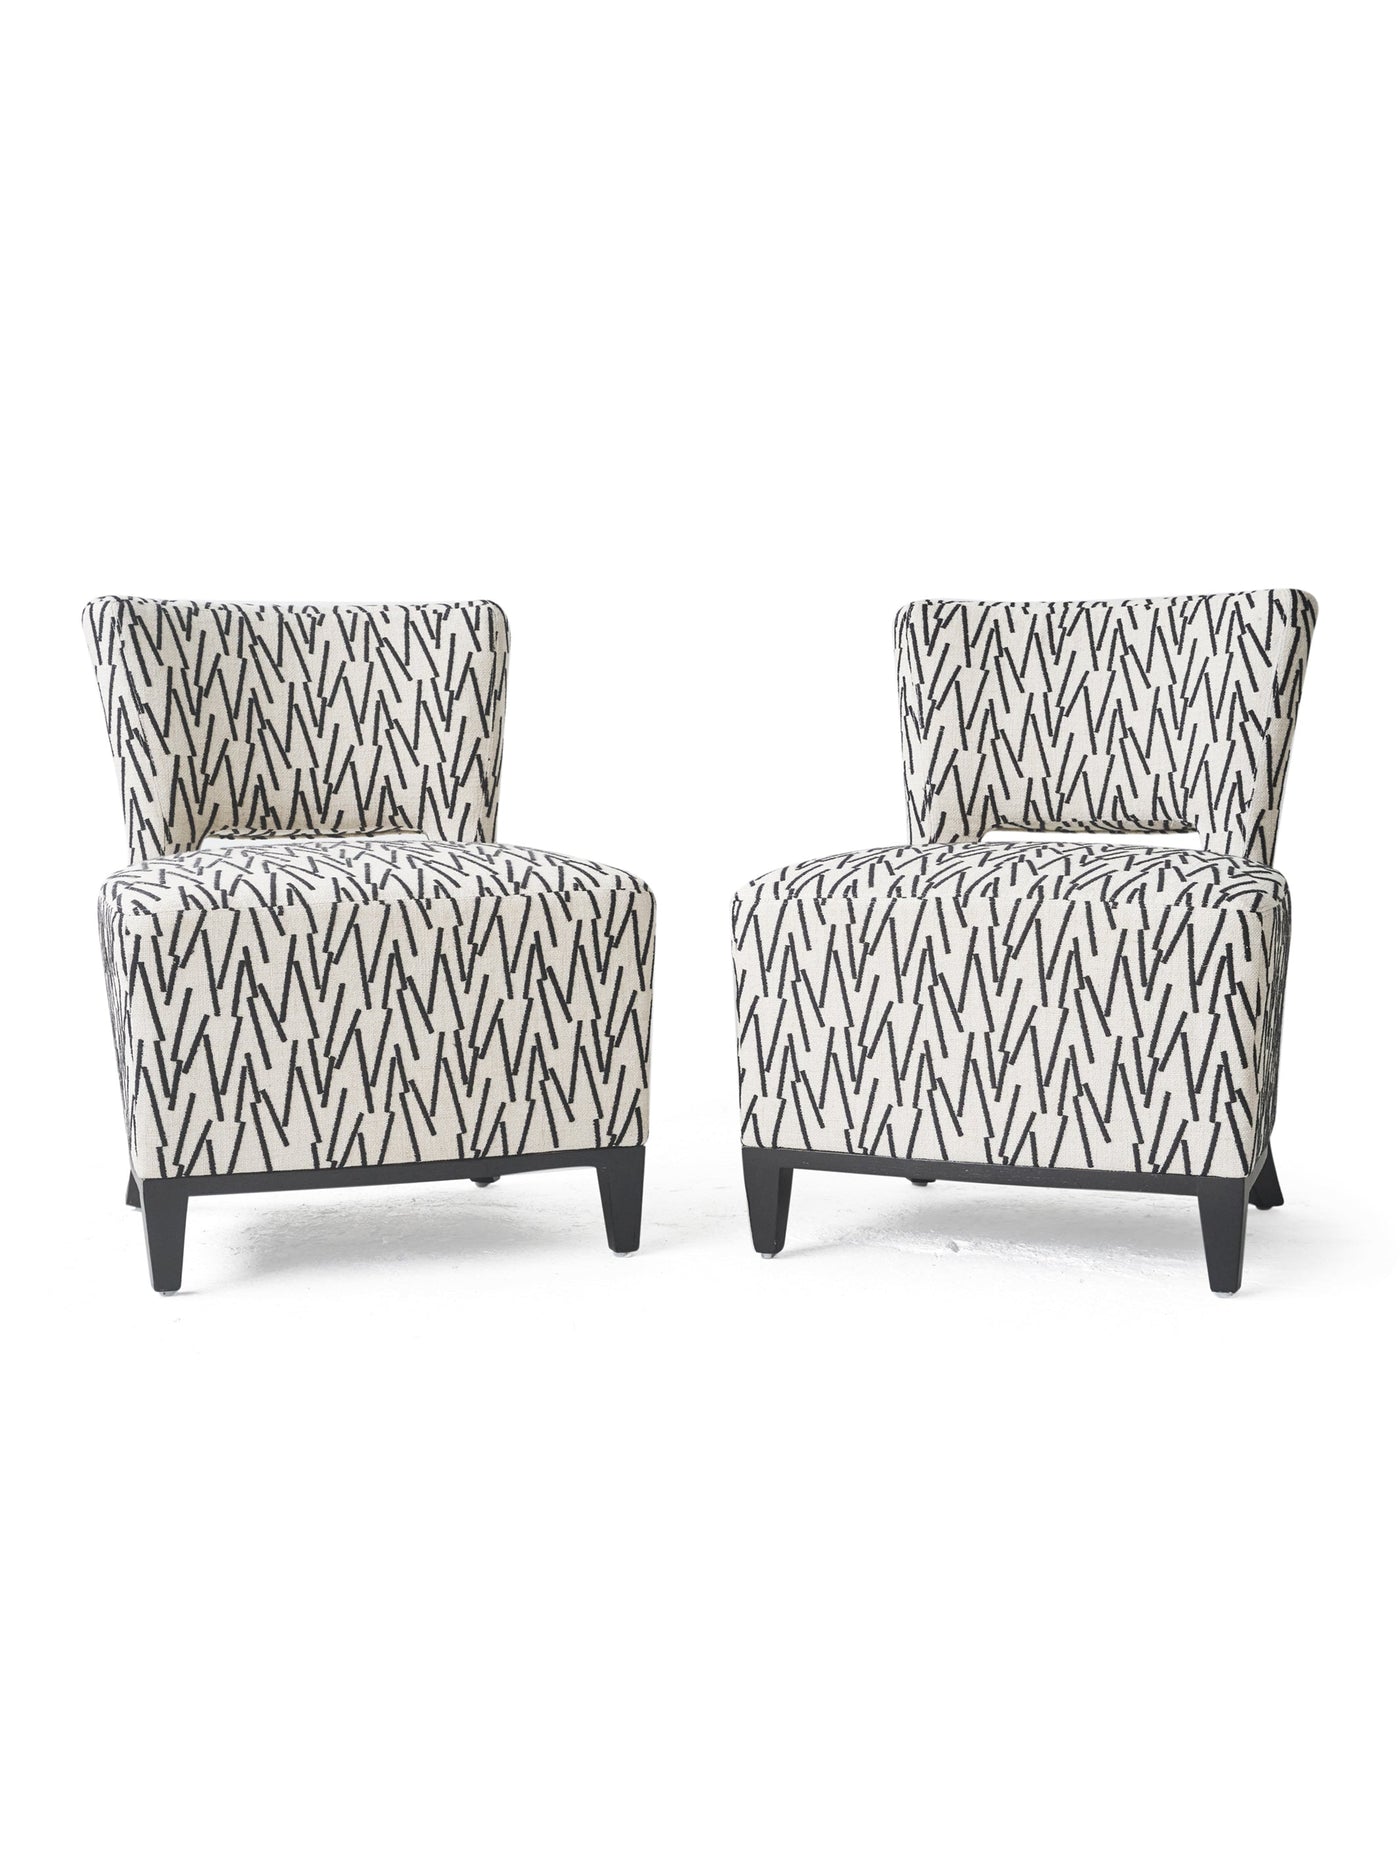 Pair of Low Chairs in Black & White from The Upper House in Larsen Fabric